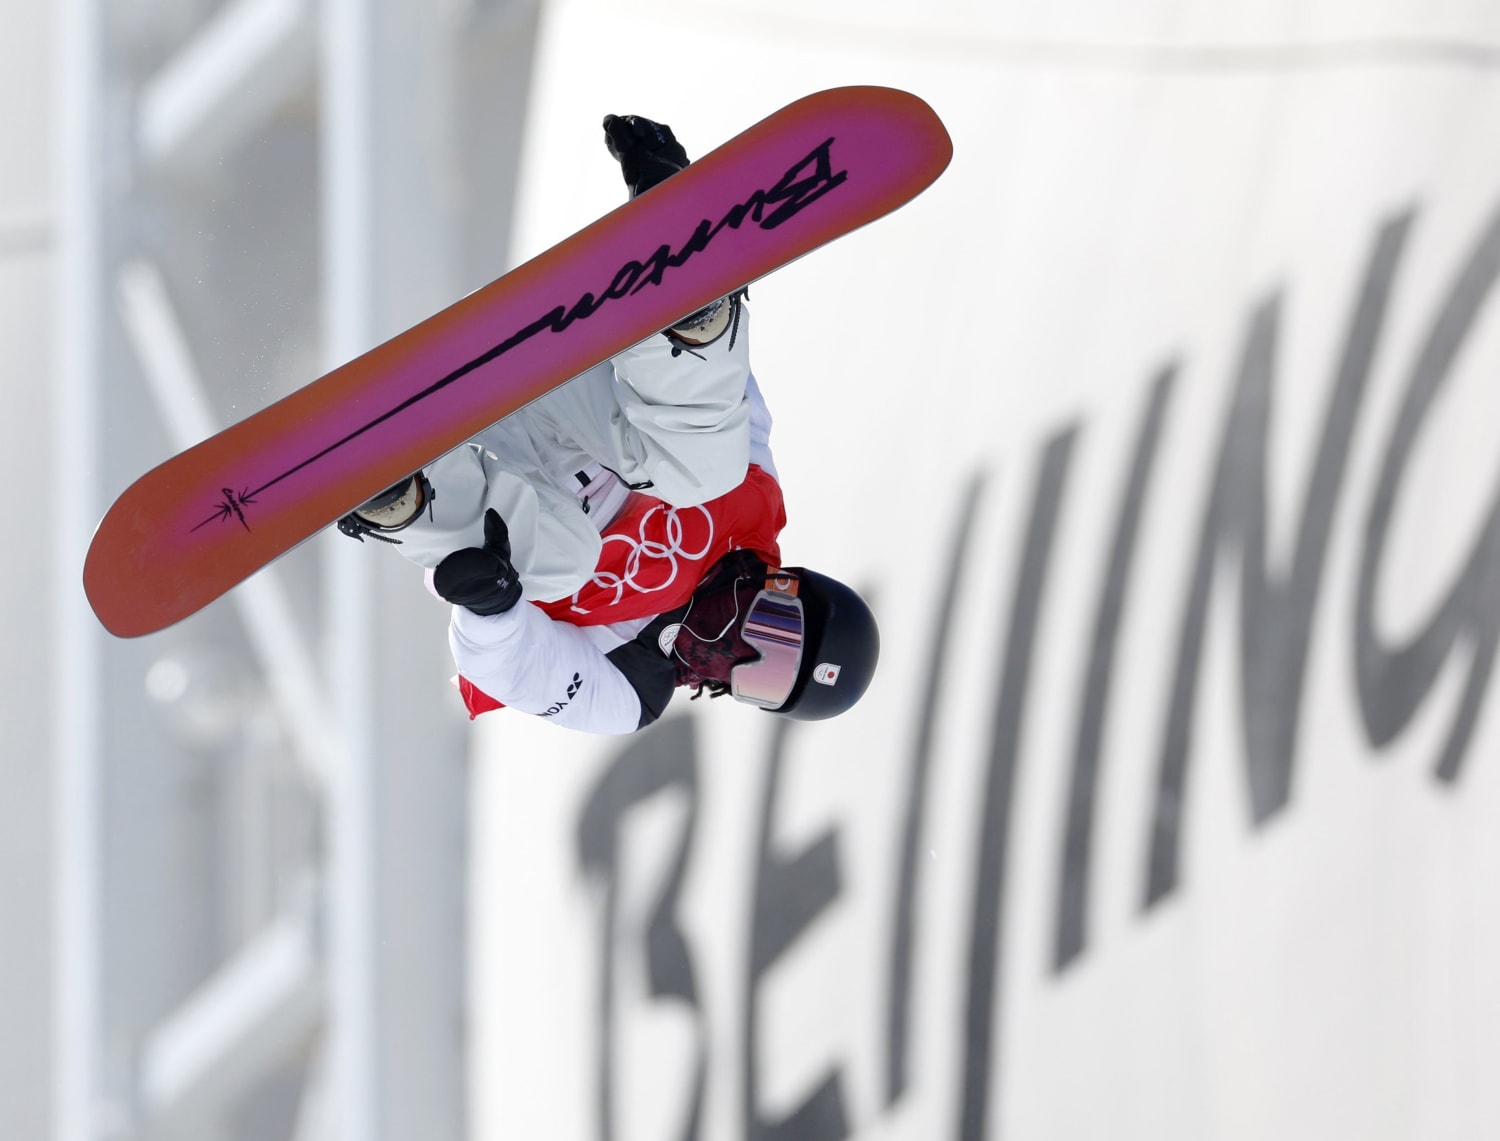 The cork, the judgment and the GOAT: the day snowboarding changed